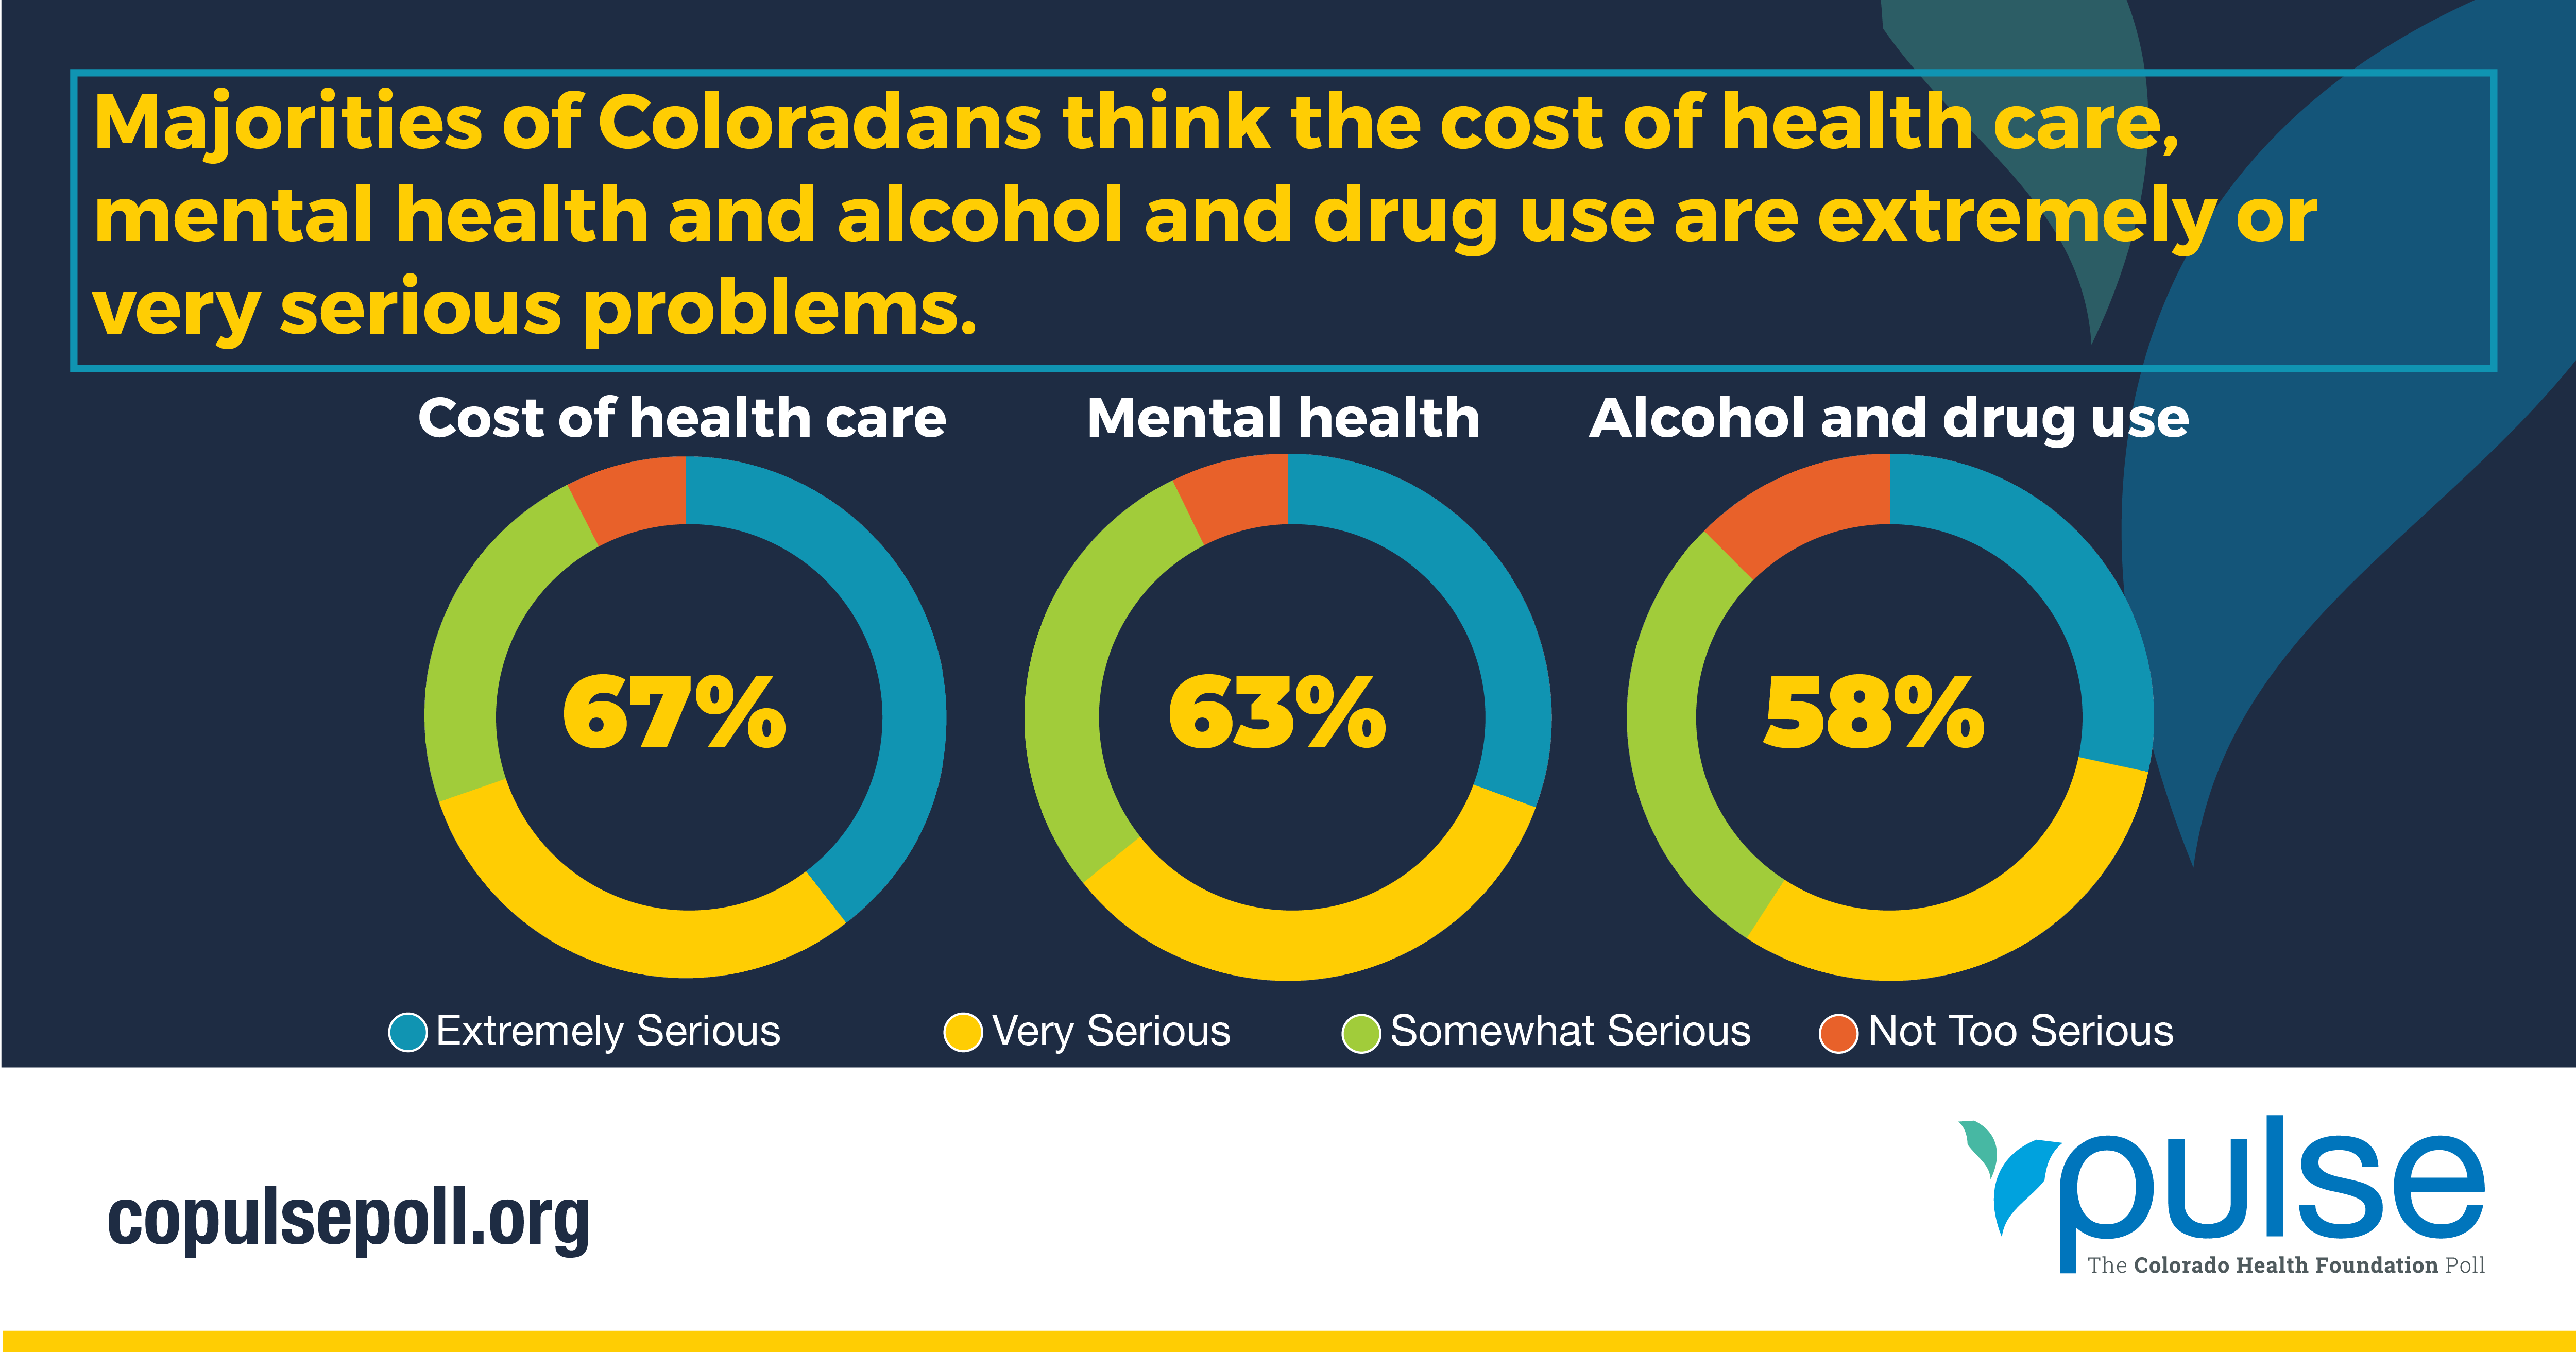 GRAPHIC: Cost of health care, mental health and drug and alcohol use are all seen as extremely or very serious problems by 67%, 63%, and 58% of respondents respectively. 